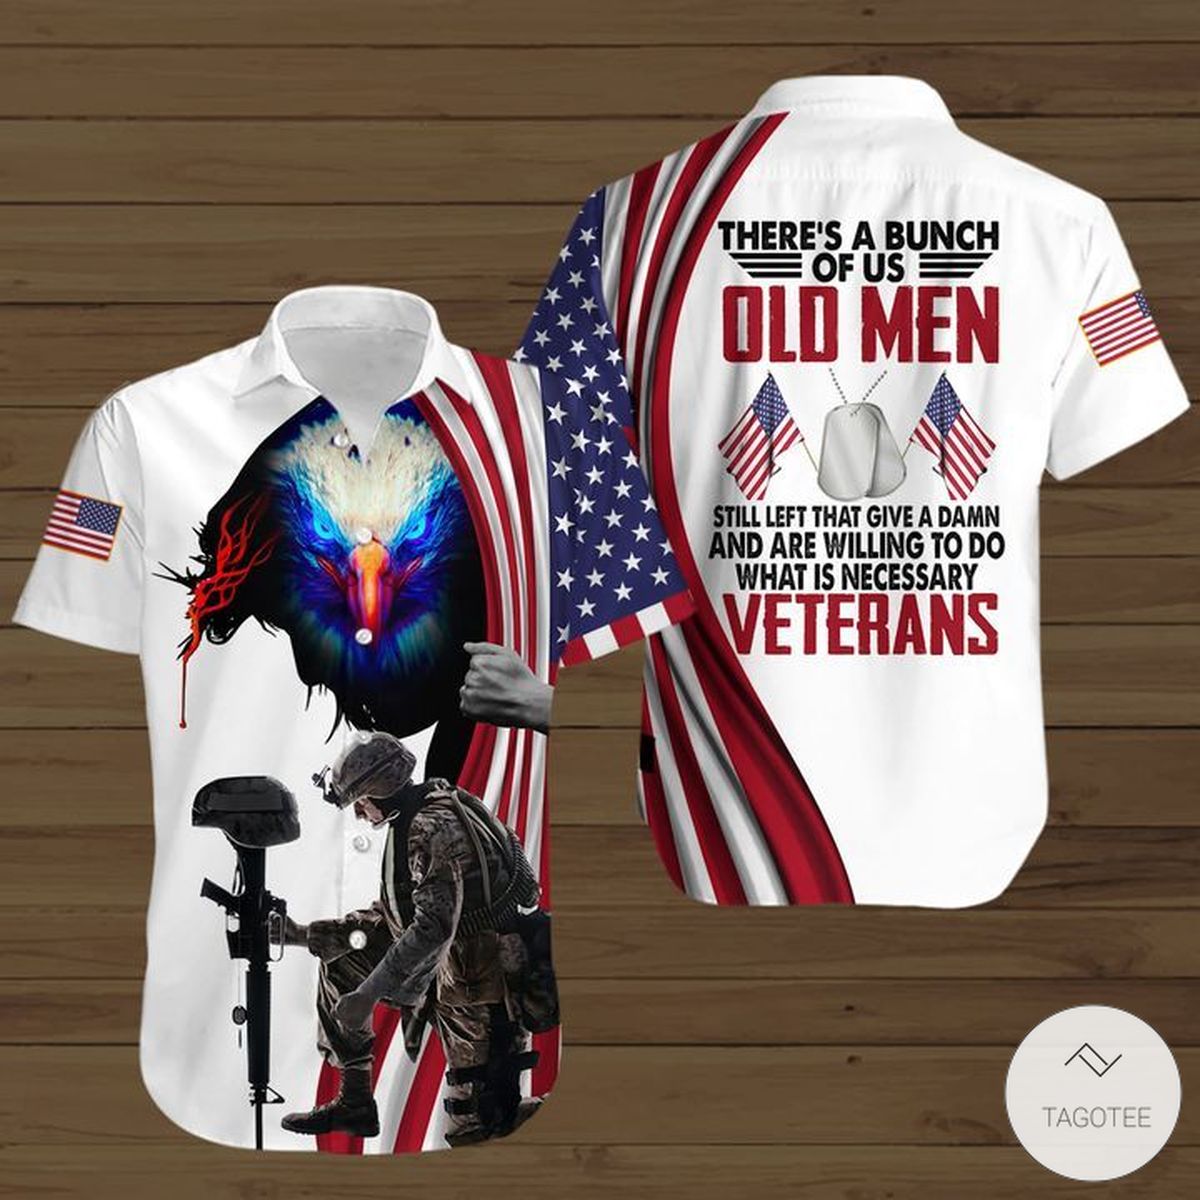 Theres-A-Bunch-Of-Us-Old-Men-Still-Left-That-Give-A-Damn-And-Are-Willing-To-Do-What-Is-Necessary-Veterans-Button-Shirt